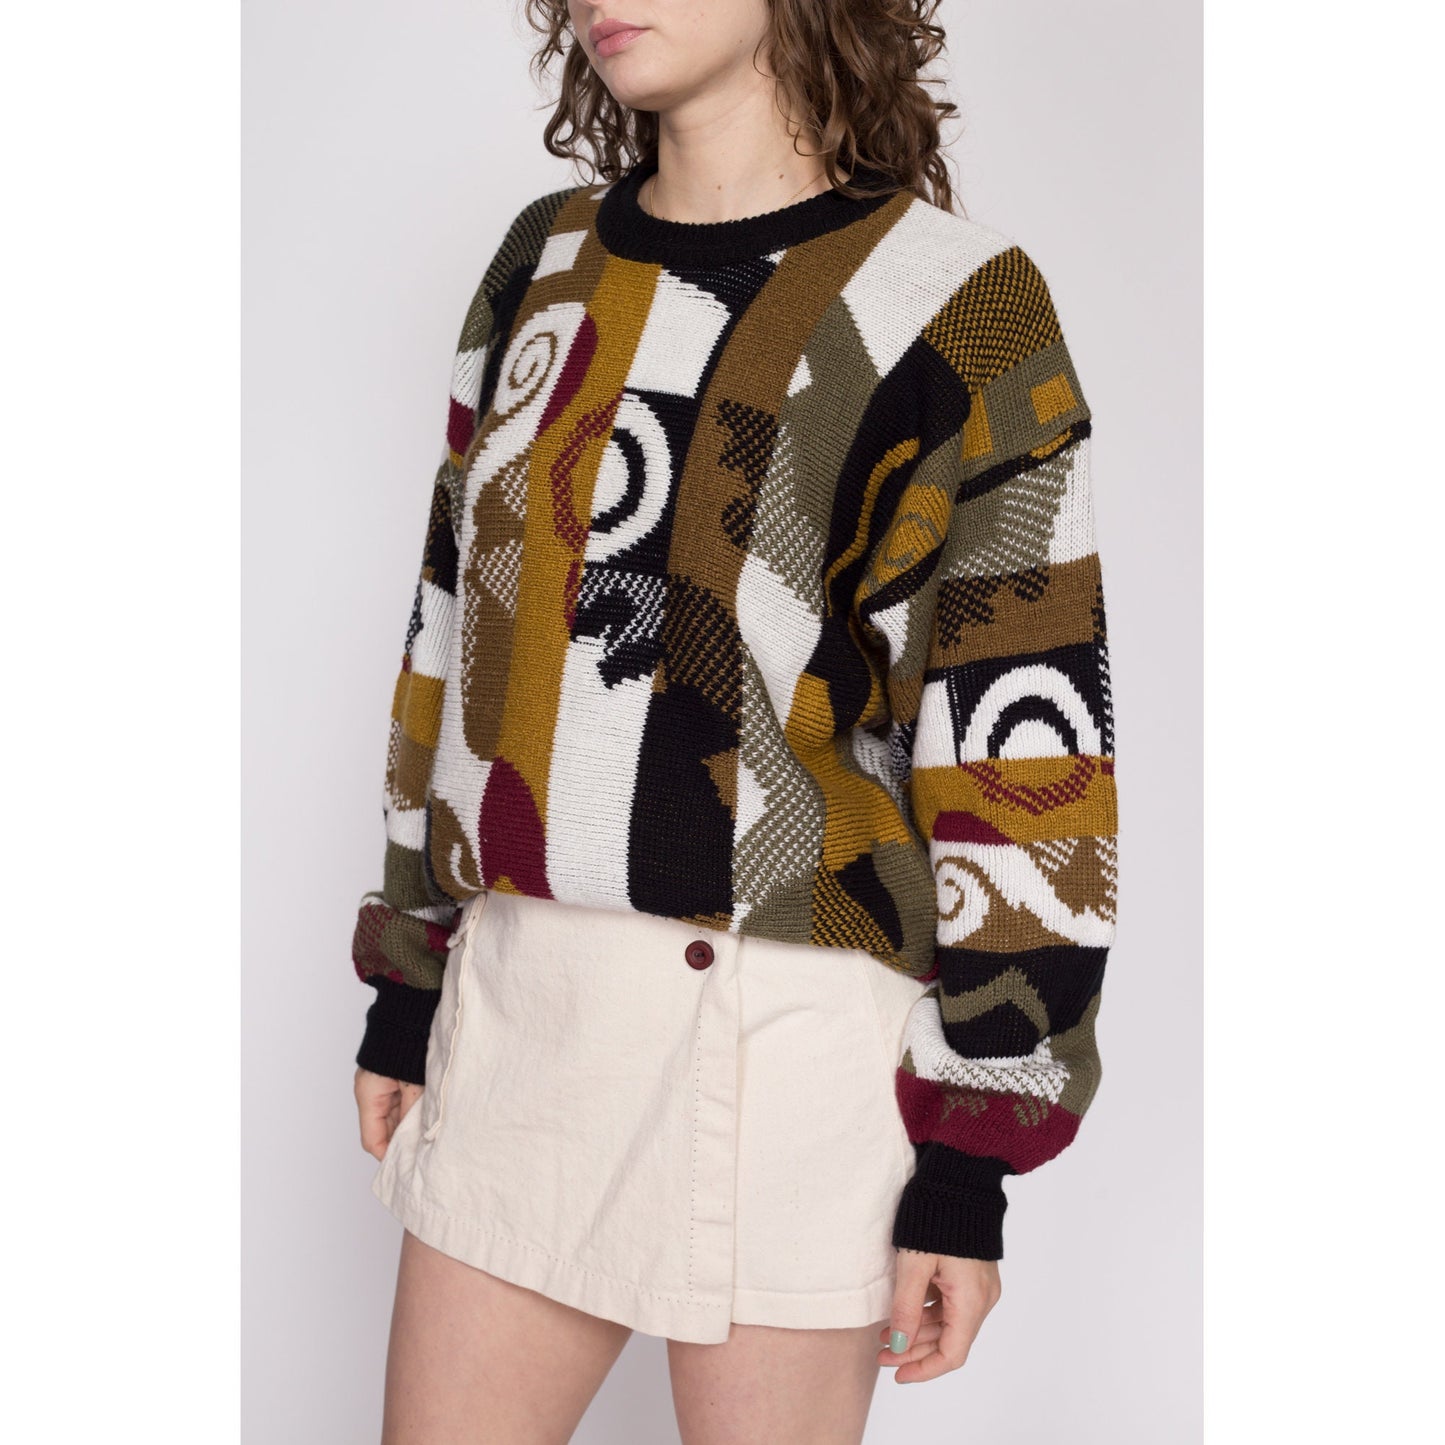 Lrg-XL 90s Abstract Slouchy Knit Sweater Unisex | Vintage Black Brown Striped Grunge Pullover